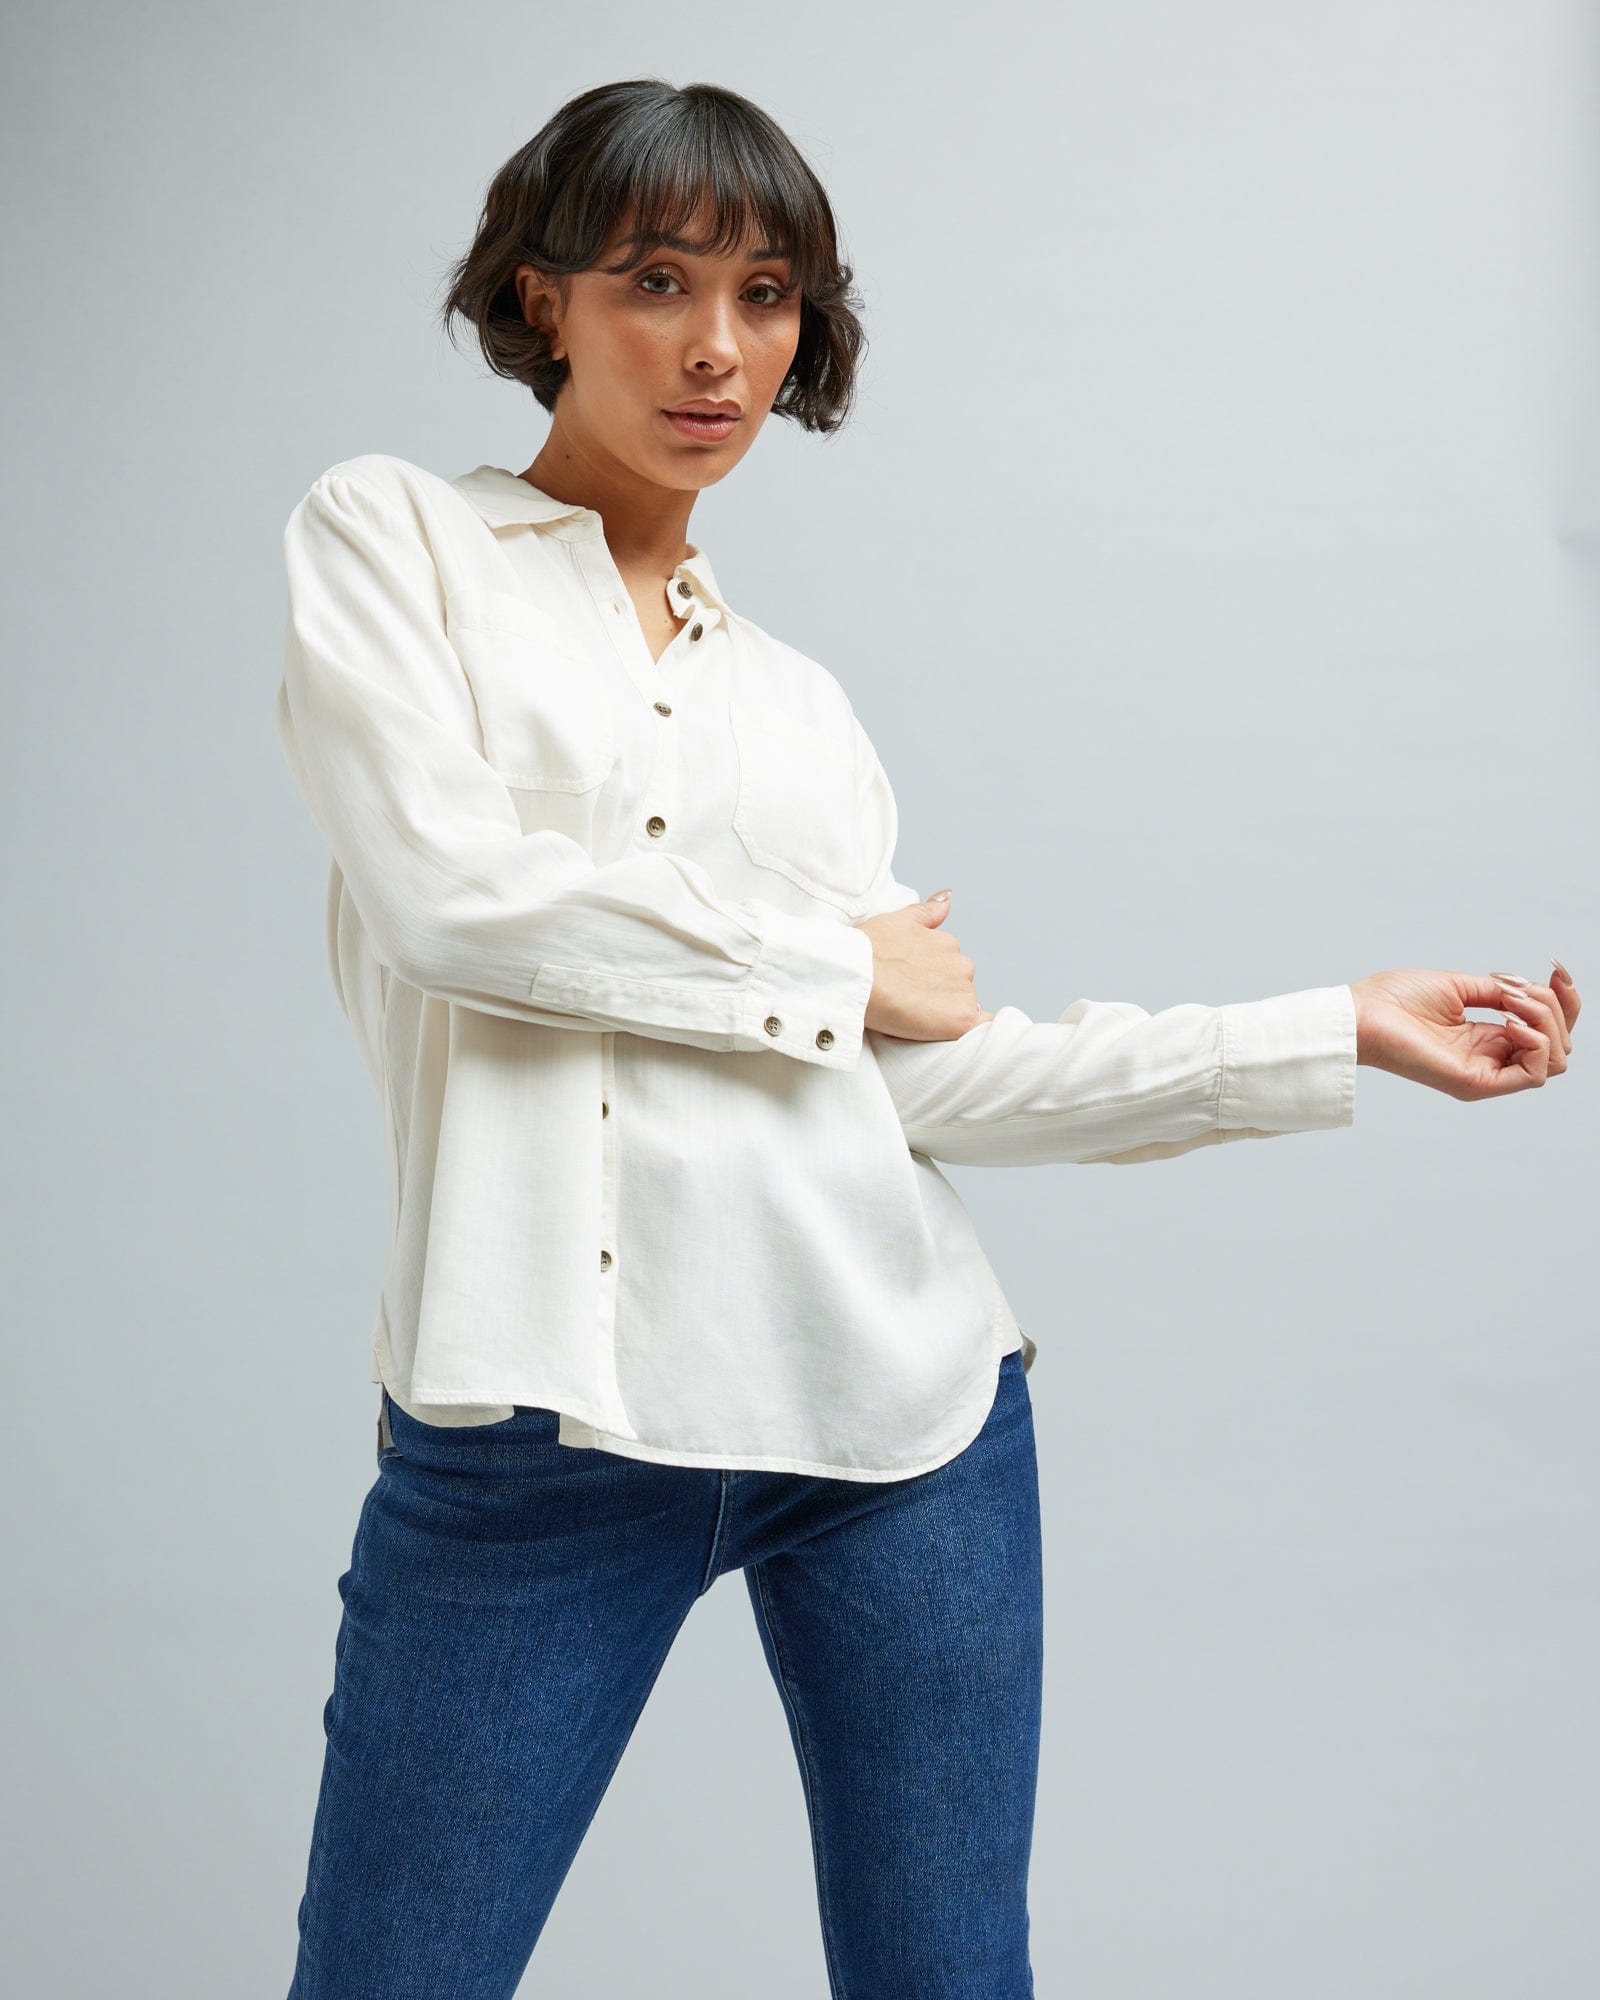 Woman in a long sleeve, white, button-down blouse